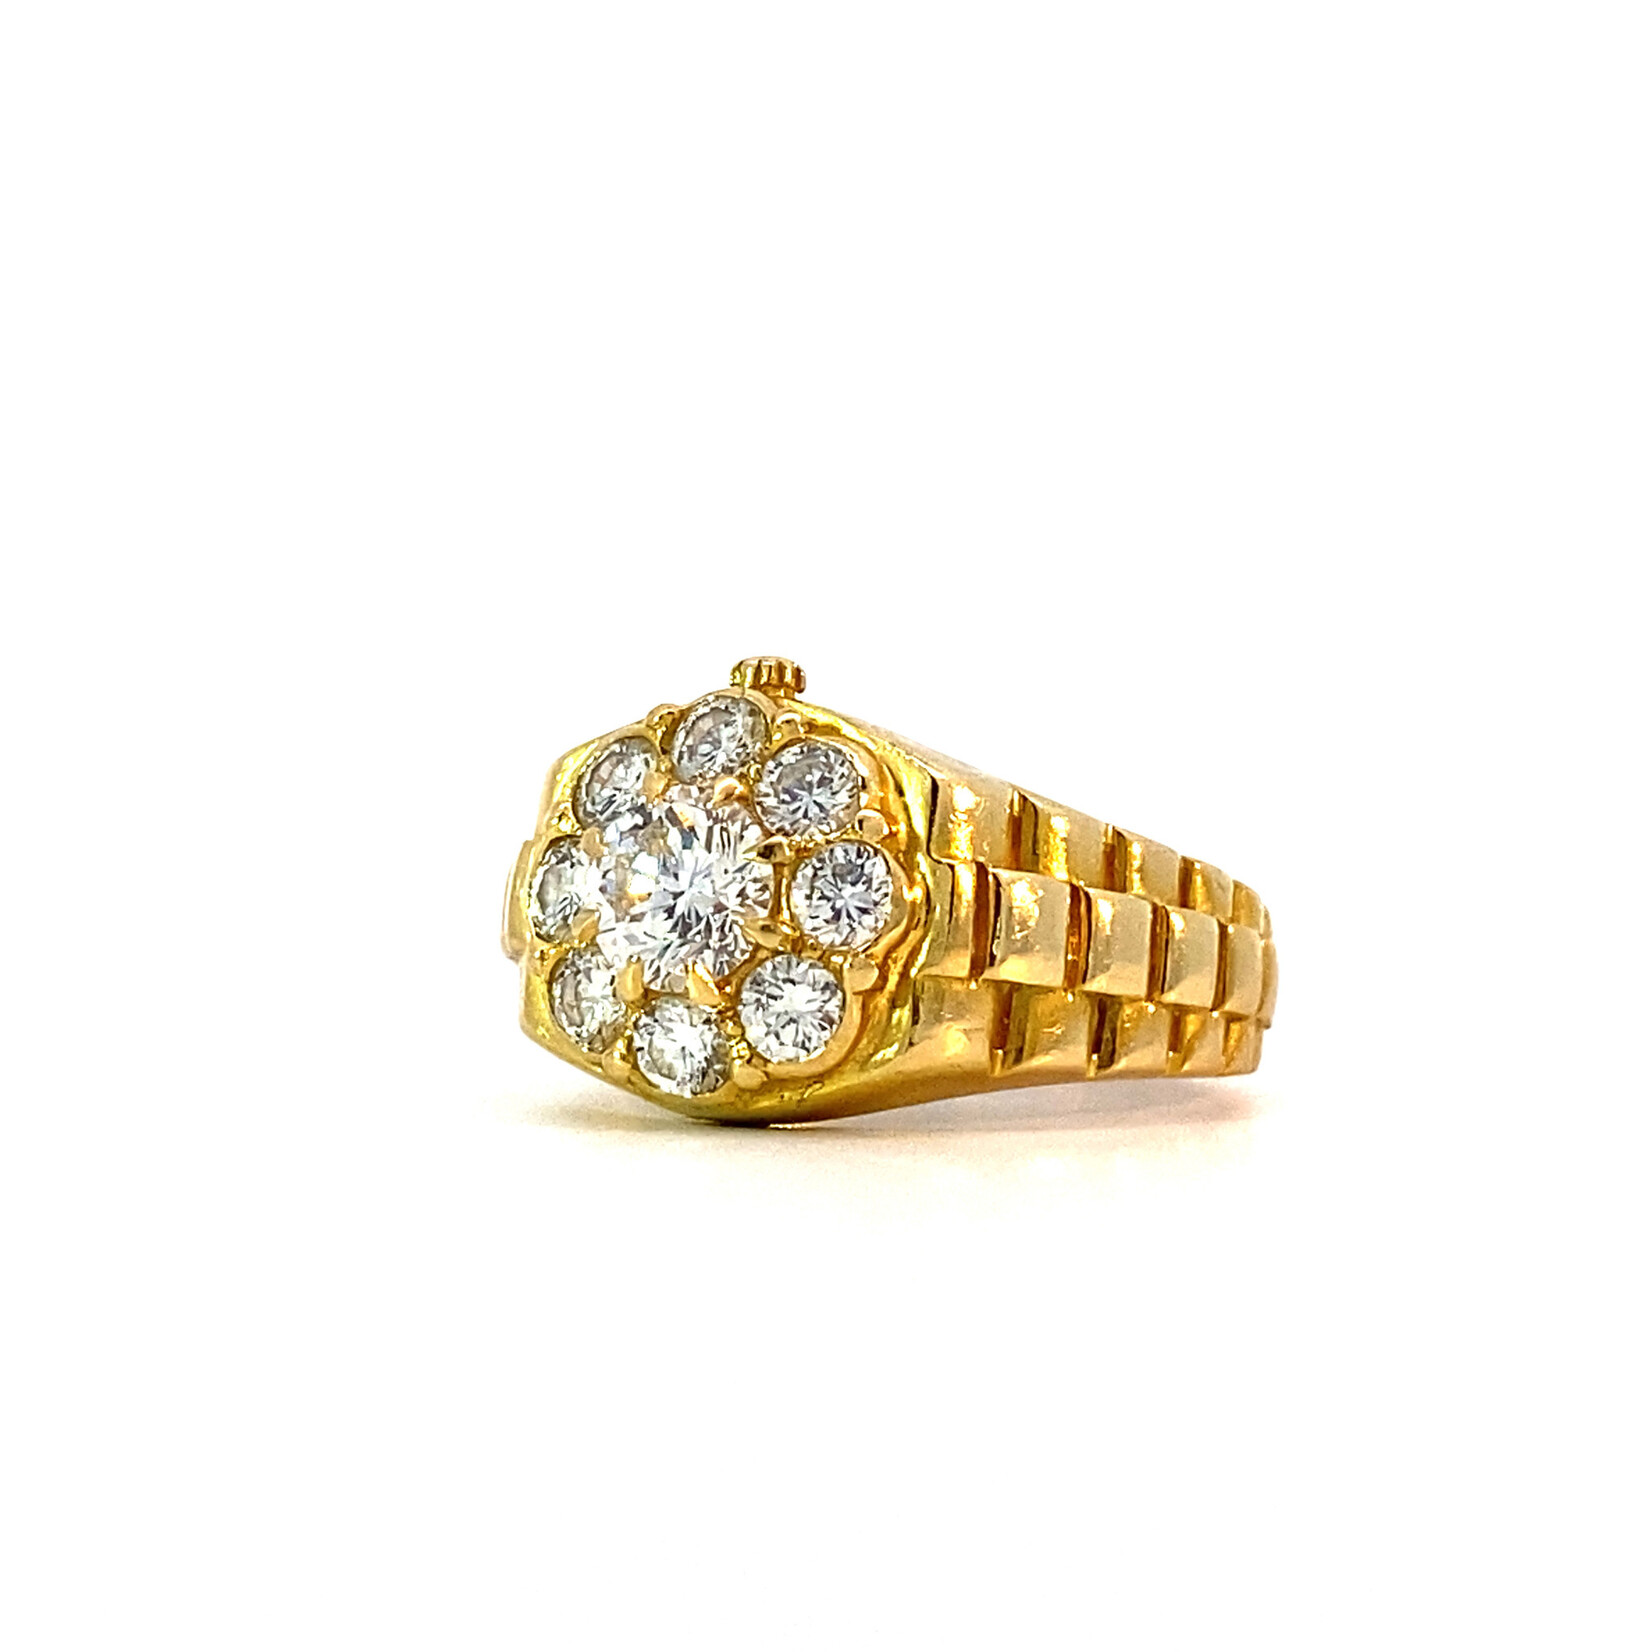 22K Yellow Gold Watch style Diamond Ring D1.10cttw size 7.25